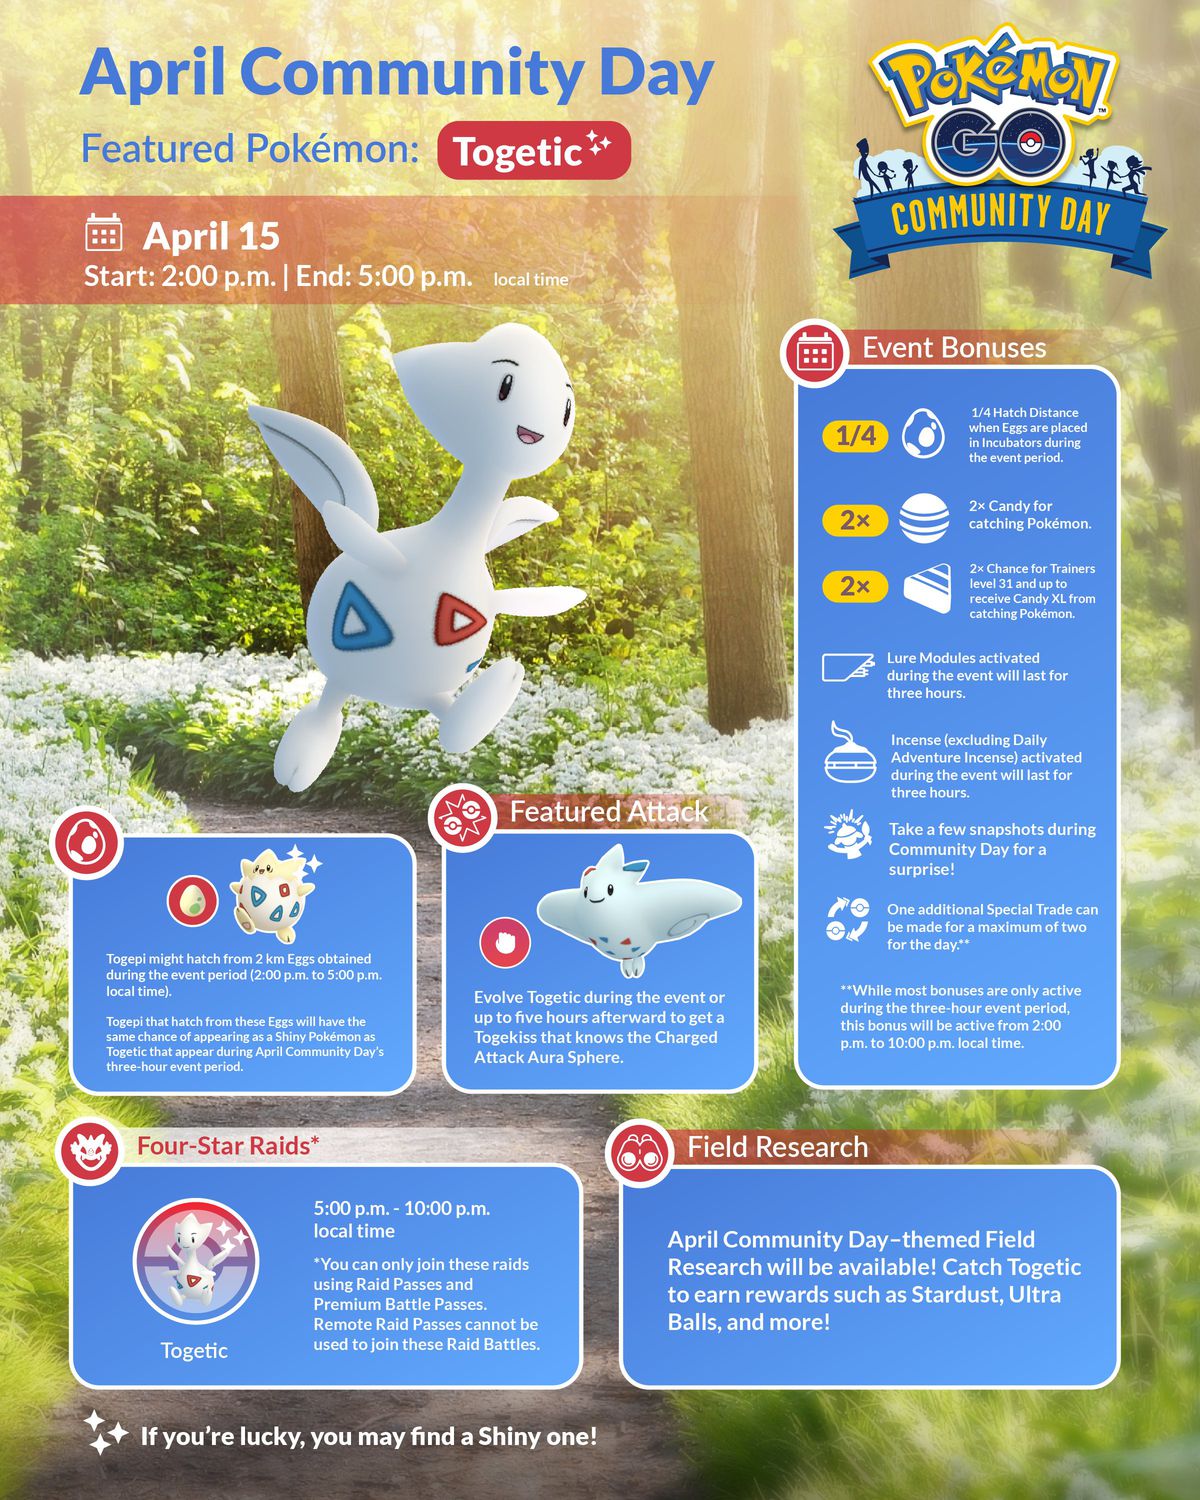 A Pokémon Go April Community Day infographic, with Togetic running on a path amongst text about the event.